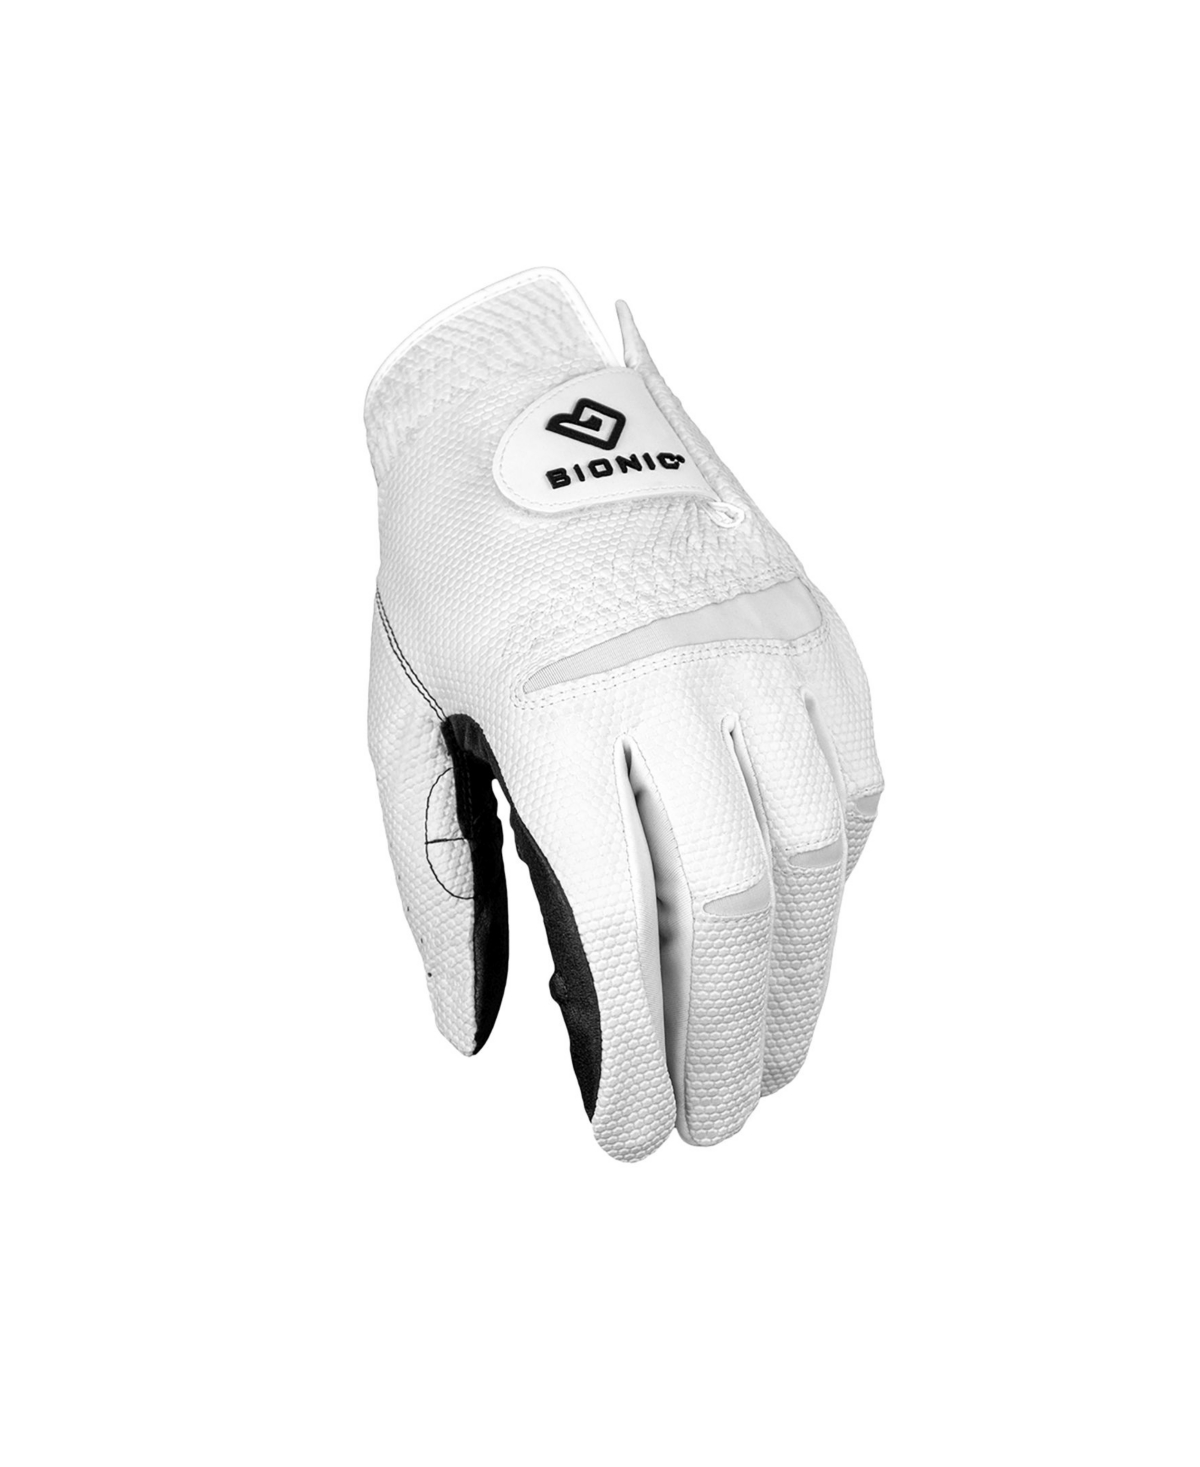 Save 30% on Men's Relax Grip 2.0 Golf Glove - Right Hand